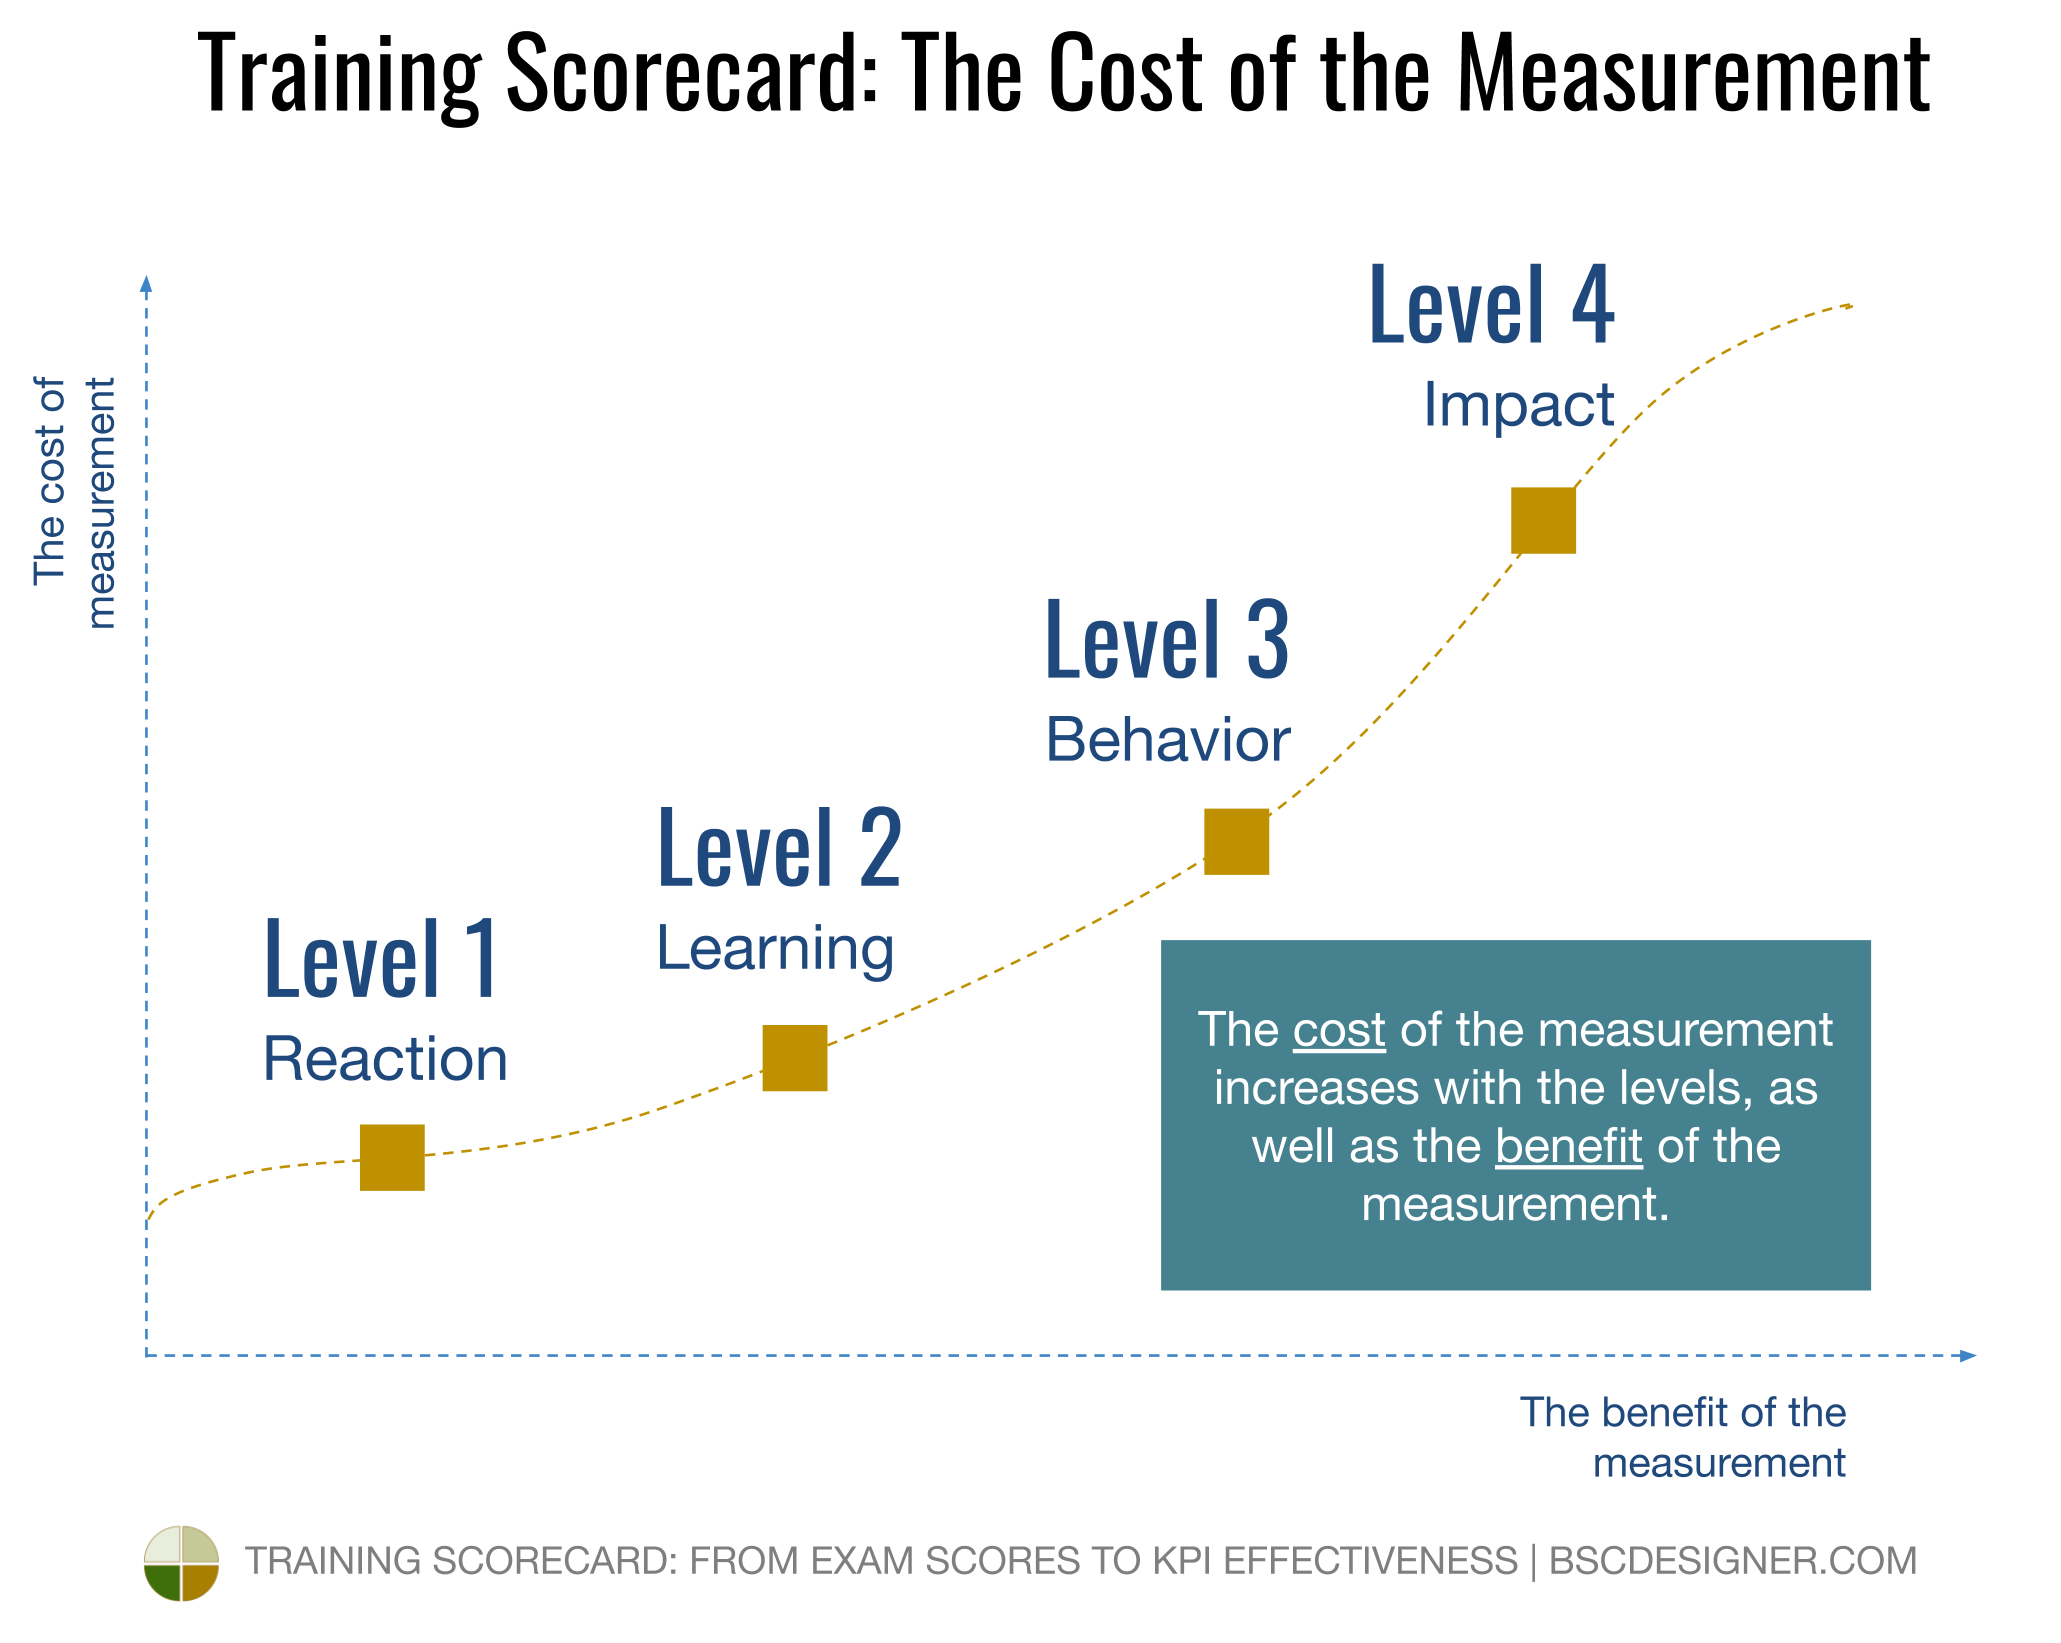 The cost of measurement increases with the levels